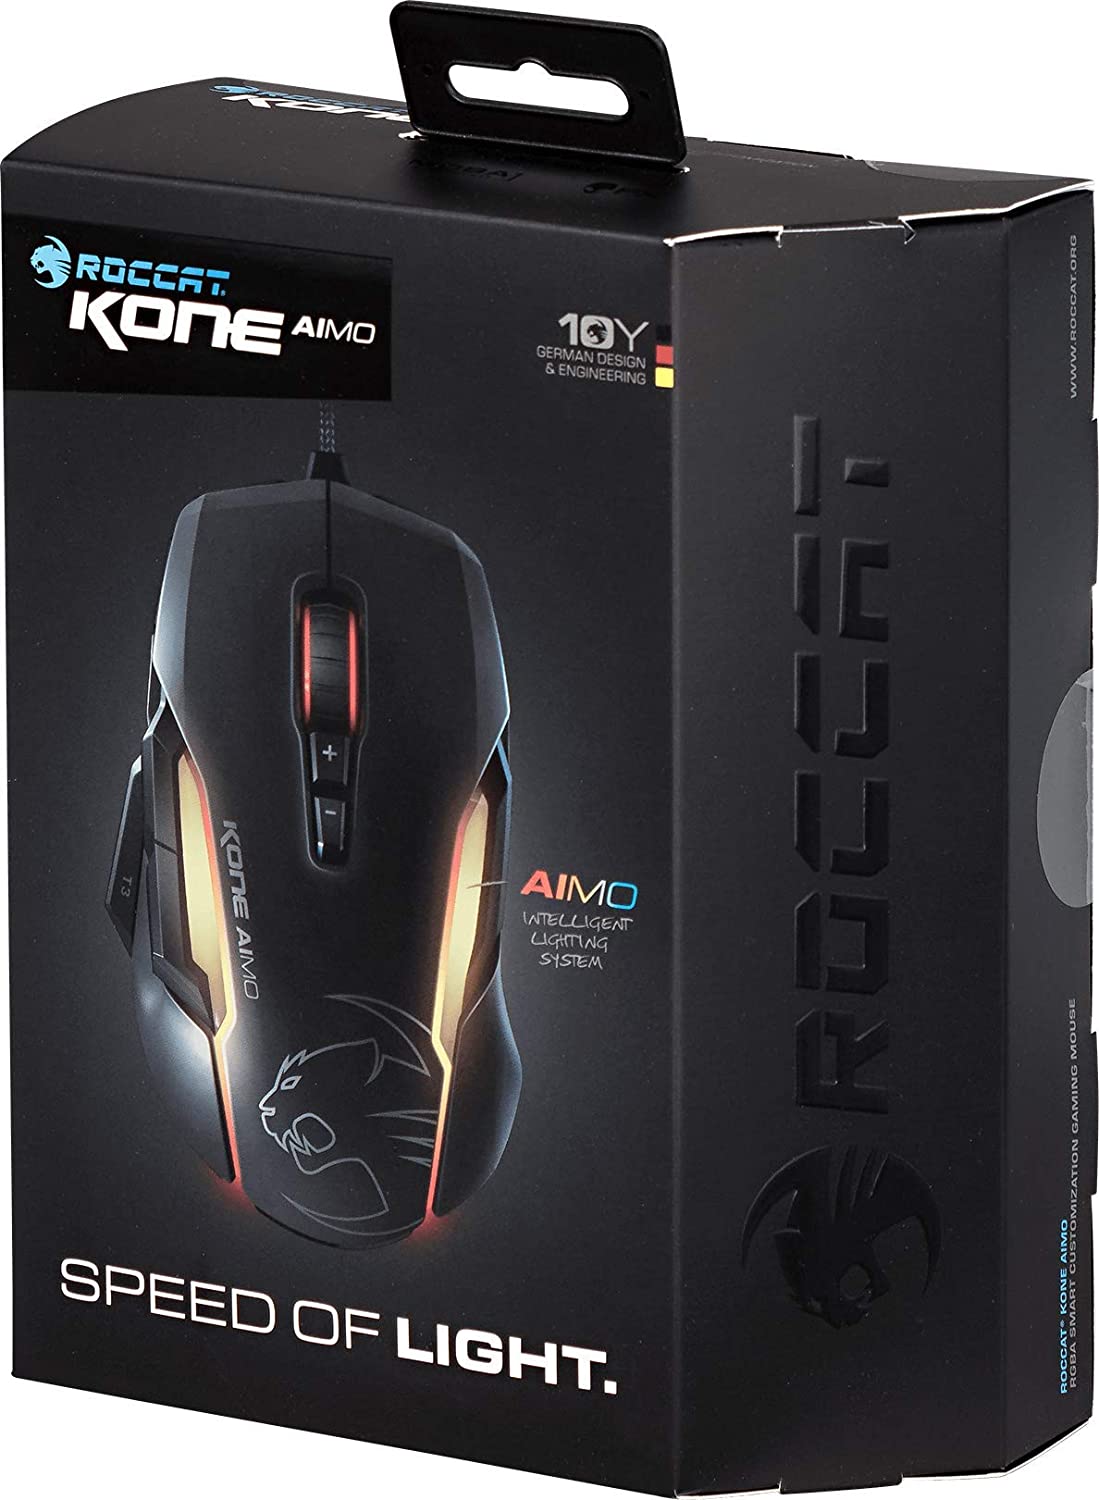 71Qr9Iq65Hl. Ac Sl1500 Roccat Https://Youtu.be/Mfk3Bmiiu8C Roccat® Swarm Powered – Comprehensive Driver Suite With A Striking Design And A Stunning Feature Set, The Kone Aimo Channels The Legacy Of Its Predecessor. It Boasts Refined Ergonomics With Enhanced Button Distinction, But What Truly Sets It Apart Is Its Rgba Double Lightguides Powered By The State-Of-The-Art Aimo Intelligent Lighting System. Aimo Is The Vivid Illumination Eco-System From Roccat®. Its Functionality Grows Exponentially Based On The Number Of Aimo-Enabled Devices Connected. It Also Reacts Intuitively And Organically To Your Computing Behavior. Eliminating The Need For Configuration, It Presents A State-Of-The-Art Lighting Scenario Right Out Of The Box, For A Completely Fluid, Next-Gen Experience. The Kone Aimo Features A Tri-Button Thumb Zone For A New And Even Greater Level Of Control. It Includes Two Wide Buttons Suitable For All Hand Sizes, Plus An Ergonomic Lower Button Set To Easy-Shift[+]™ By Default. Easy-Shift[+]™ Is The World-Famous Button Duplicator Technology That Lets You Assign A Secondary Function To The Mouse'S Buttons. It'S Easy To Program And Has Options For Simple Commands And Complex Macros. Roccat - ماوس ألعاب مخصص ذكي من Kone Aimo Rgba (أسود) 23 مفتاحًا قابلًا للبرمجة ، مصمم في ألمانيا